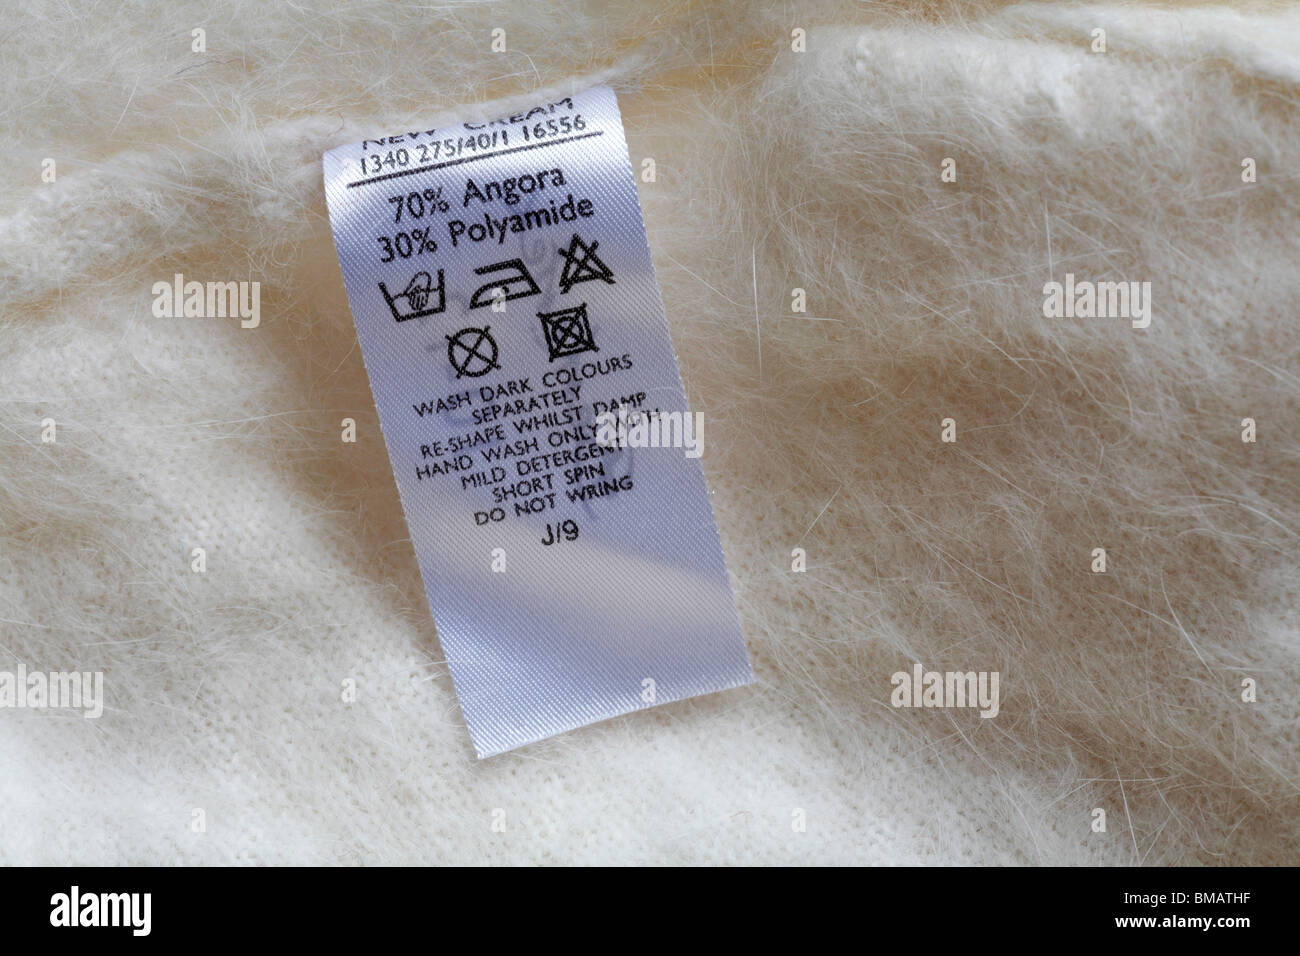 care label in cream jumper made up of 70% angora and 30% polyamide - care  washing symbols and instructions Stock Photo - Alamy